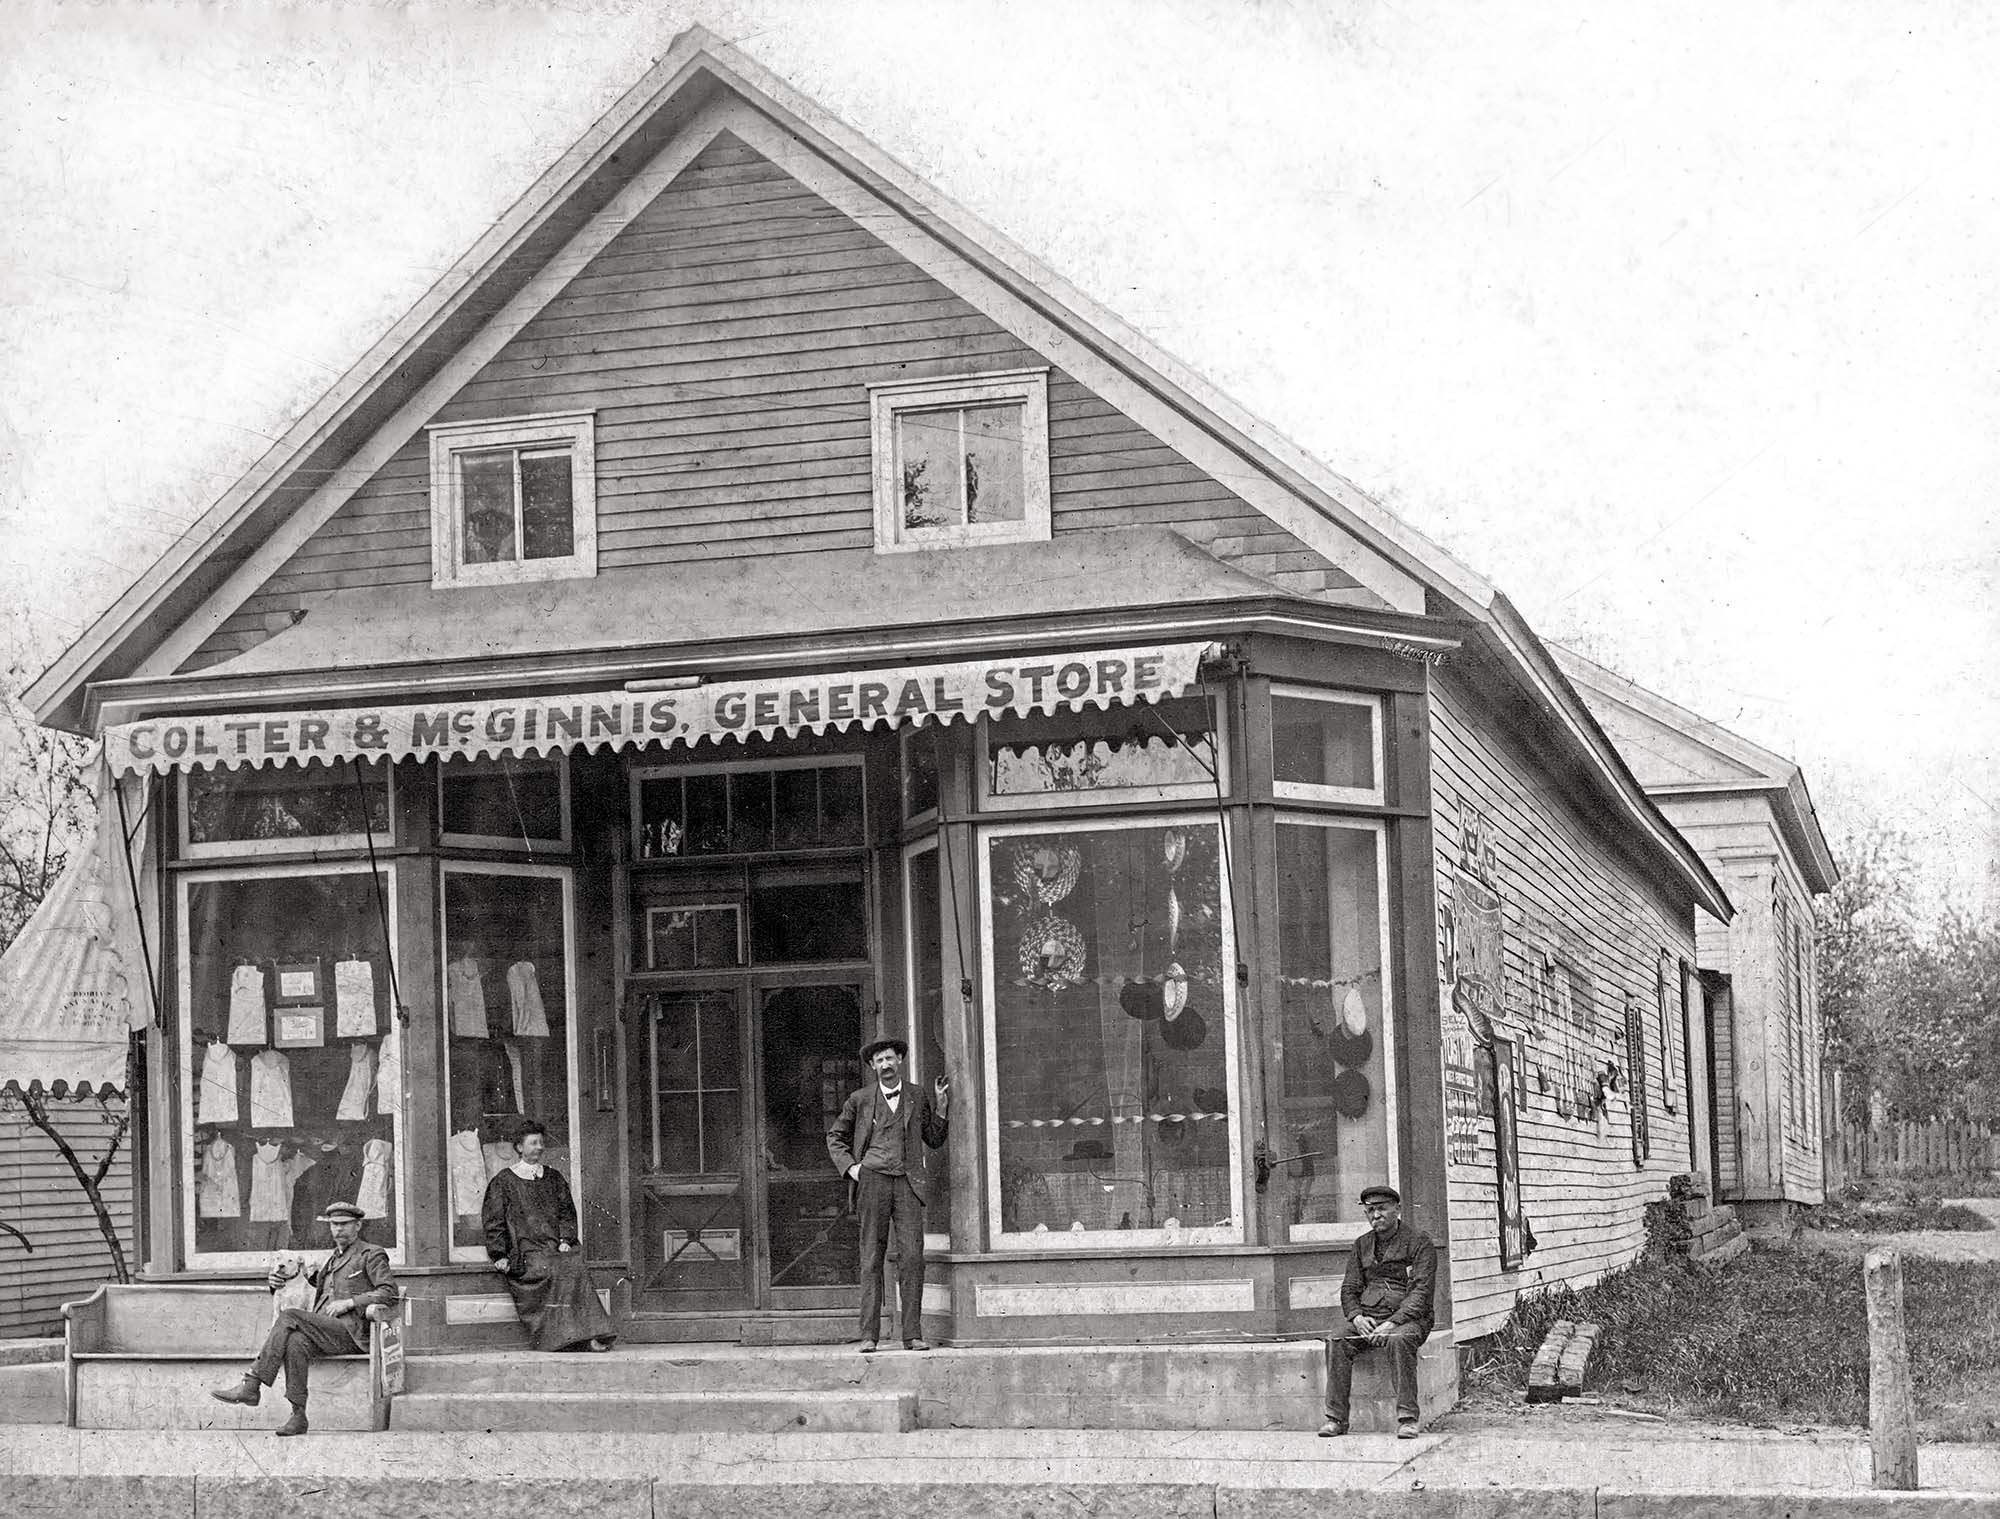 Colter & McGinnis' General Store on the 130 block of South Sampson Street, Tremont, Illinois. Circa 1900.

Pictured  (left to right) are Frank E. McGinnis, Anna Patte Rollins and  Edward Colter, (Unknown), 1900.

The store was later occupied by Gerald Beechman's Grocery, which burned down in a fire in March 1940. The Congregational Church building is located in the rear and was organized in 1844, with a church building  was erected in 1848.

"In 1859 Messrs. Wm. Pettis and Nathanial Ingalls built a store building, also a bank building on lot 12 in block 25. The store building is the one where Ed L. Colter and Frank E. McGinnis were for a number of years." — from the "Historical Account of the Origin, Growth and Development of The Village of Tremont, Illinois", 1925

"Hugh McLean, the Village Clerk, will have his office at Colter & McGinnis’ store and anyone having business with him can have the same attended to whether he is there or not, as he has made arrangements with Mr. Colter to look after the affairs of the office if he is not in town." — Oct. 25, 1907